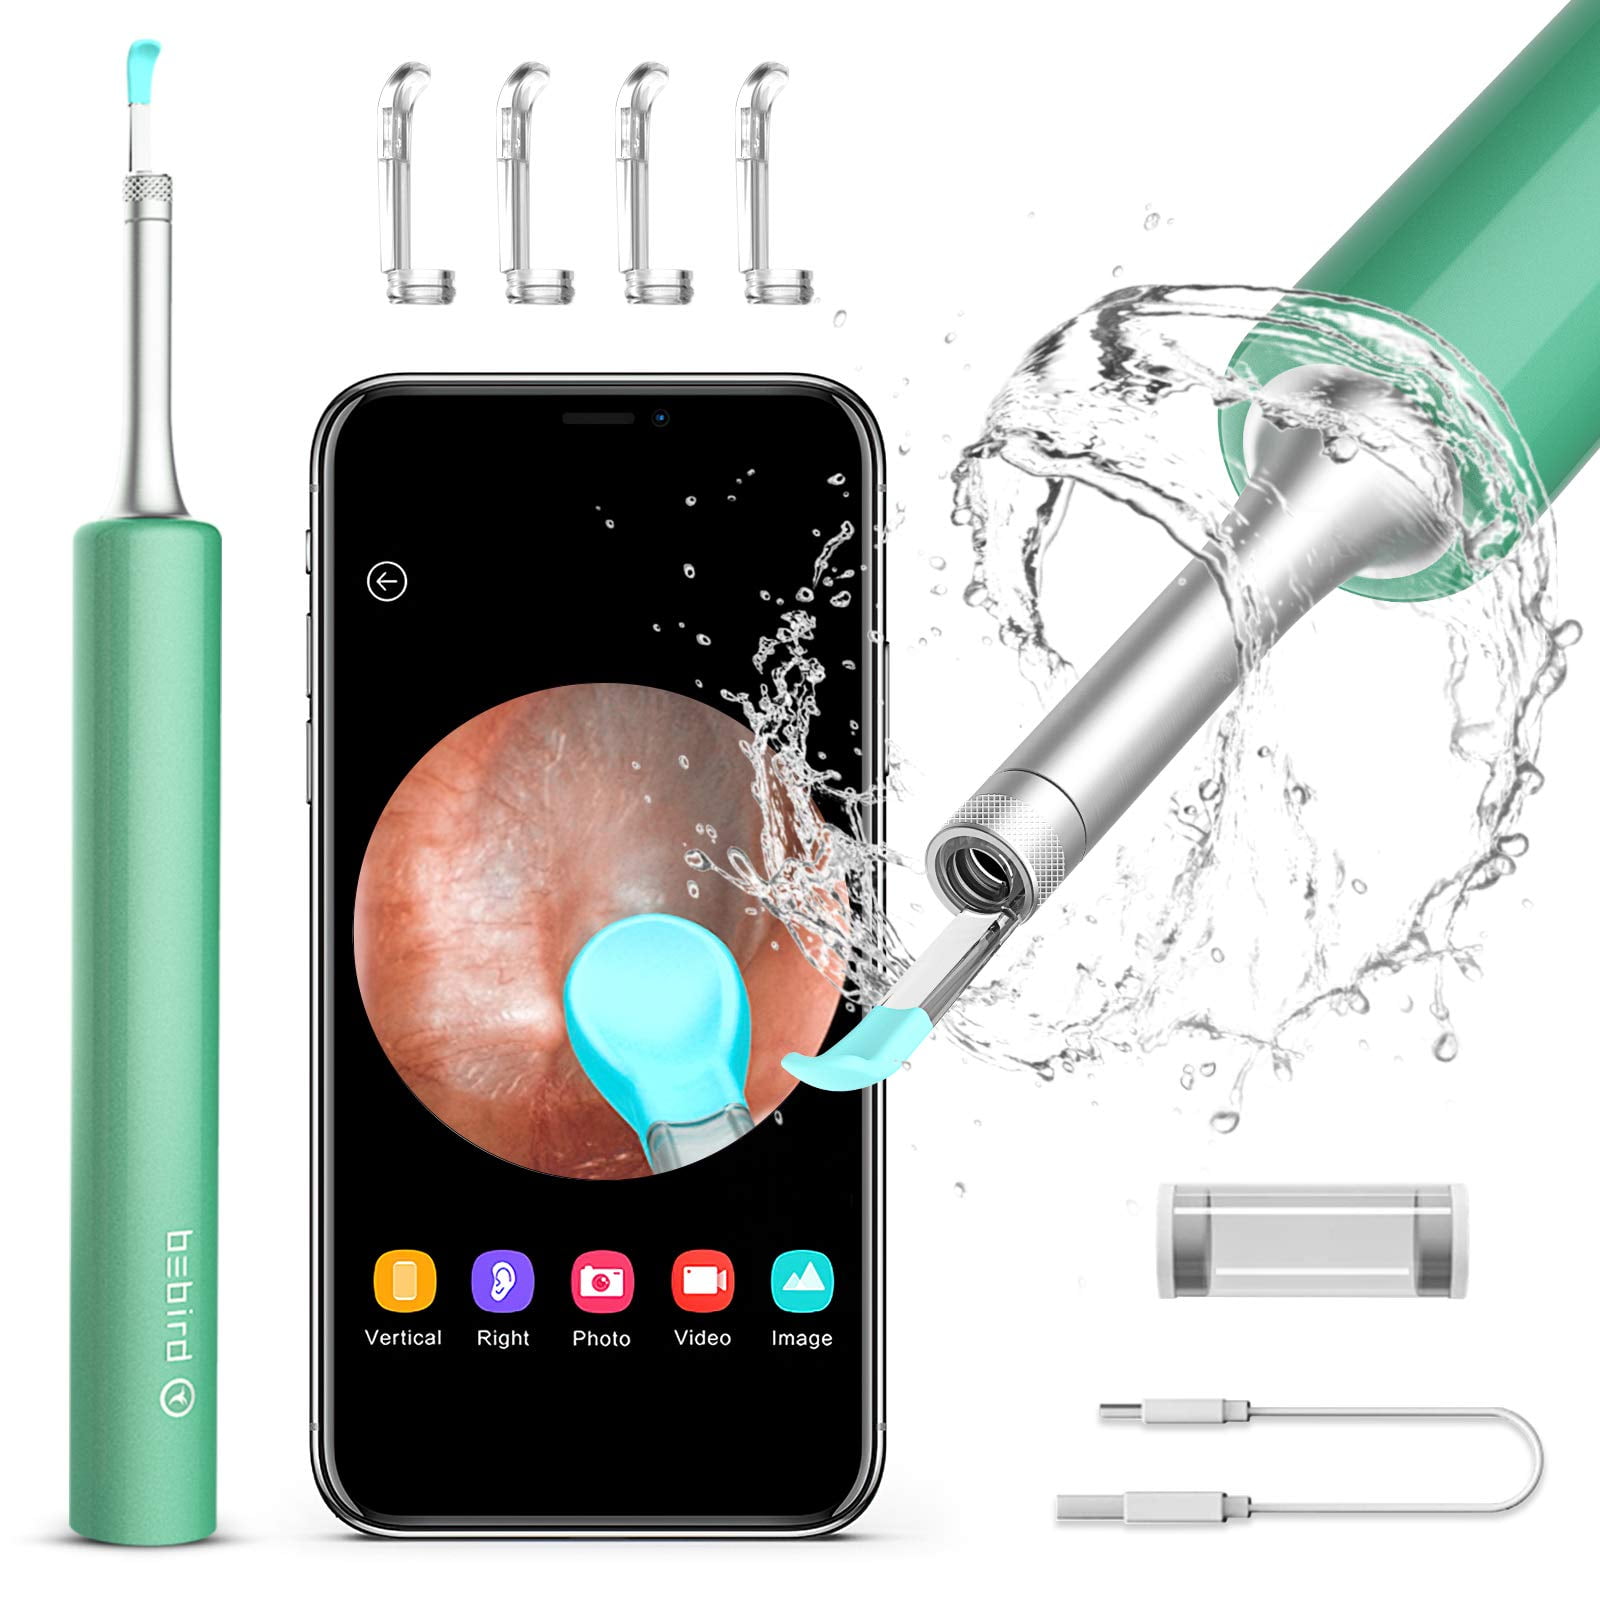 BEBIRD Ear Wax Removal Tool iPad & Android Smart Phones Ear Cleaner Tool for iPhone Wireless Ear Cleaner with Camera 1080P FHD Ear Wax Remover Endoscope with LED Light 